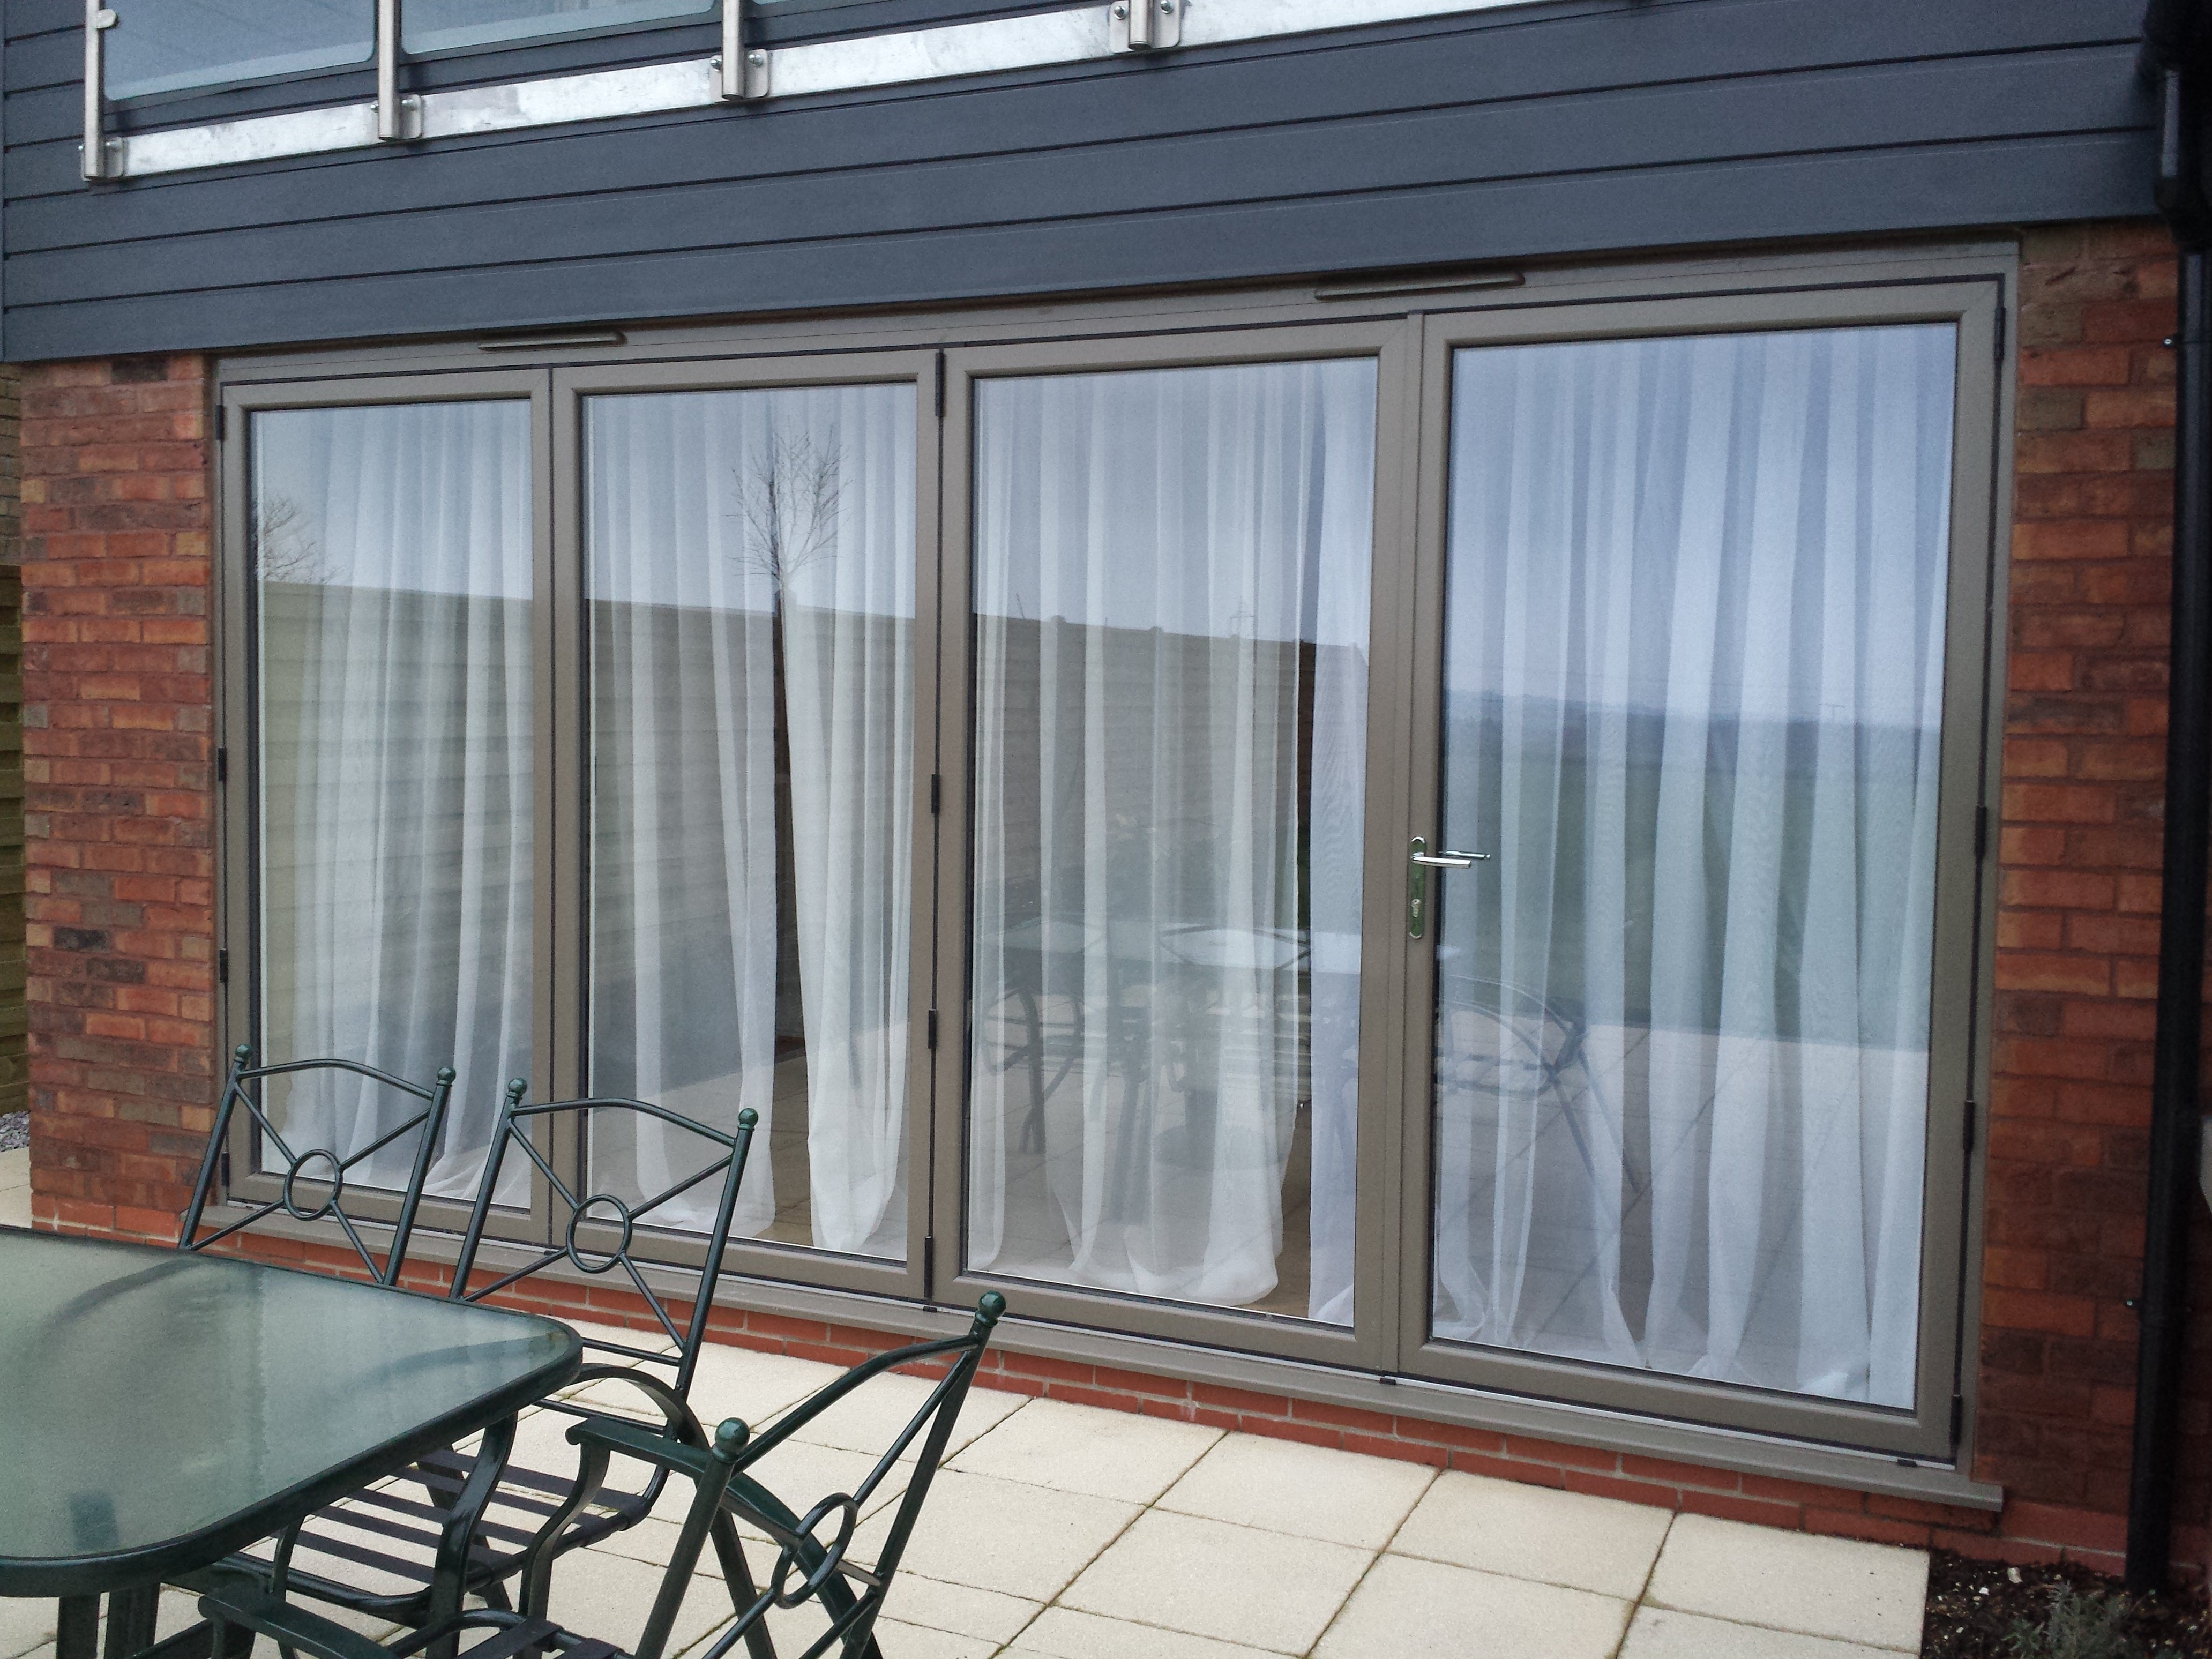 are bifold doors secure